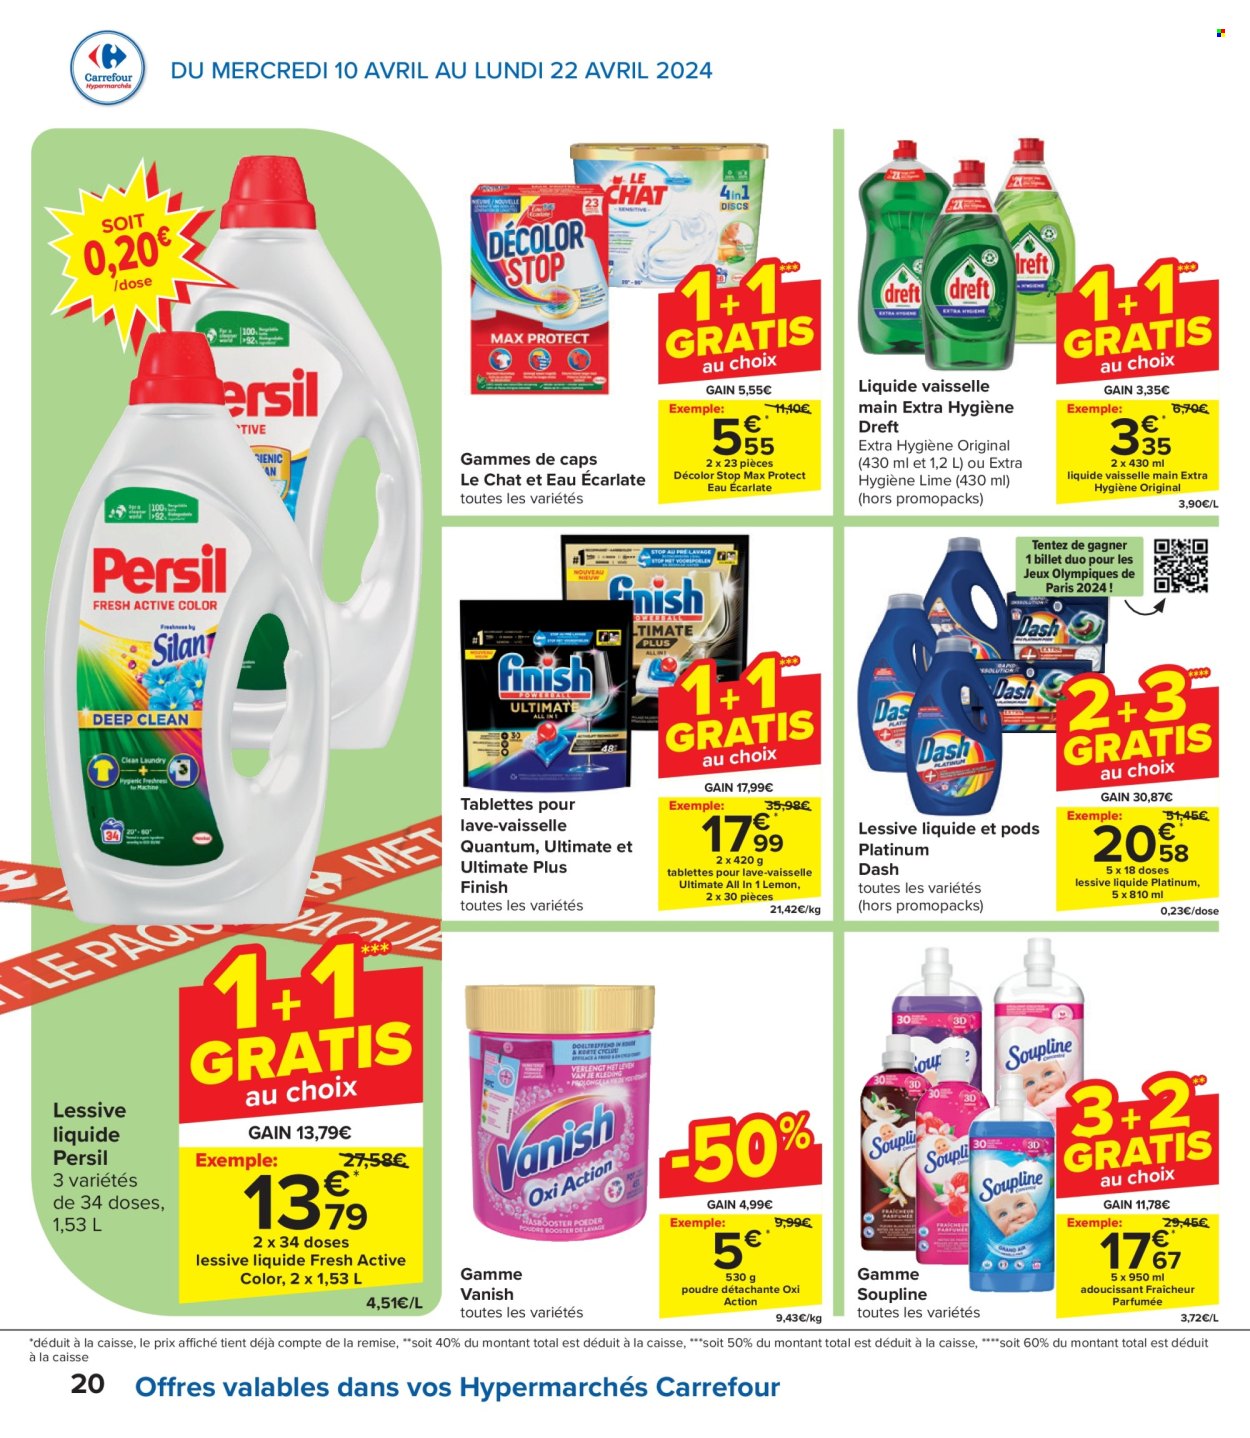 Catalogue Carrefour hypermarkt - 10.4.2024 - 22.4.2024. Page 20.